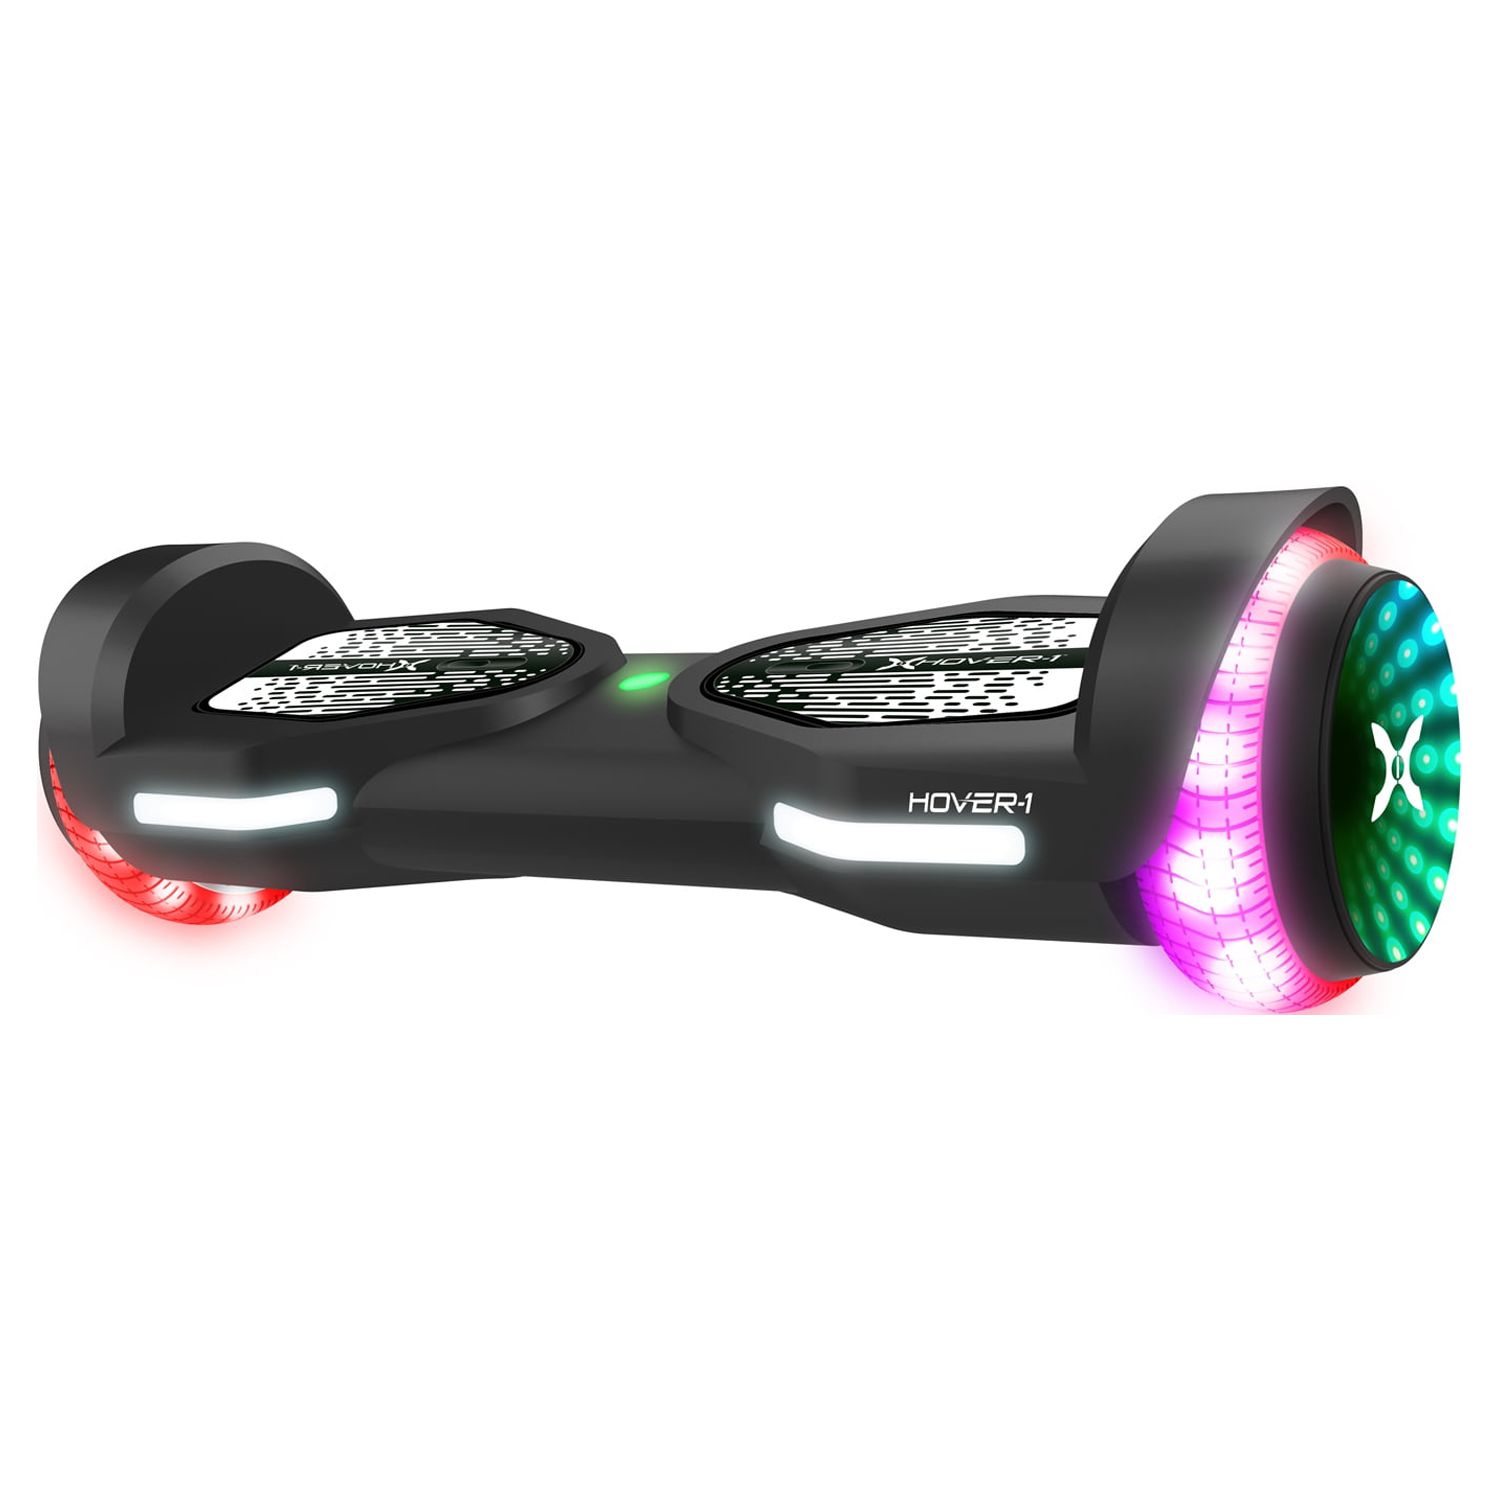 Hover-1 Allstar 2.0 Hoverboard for Teens, Black, Lightweight & Bluetooth, Max Speed 7 mph - image 2 of 6